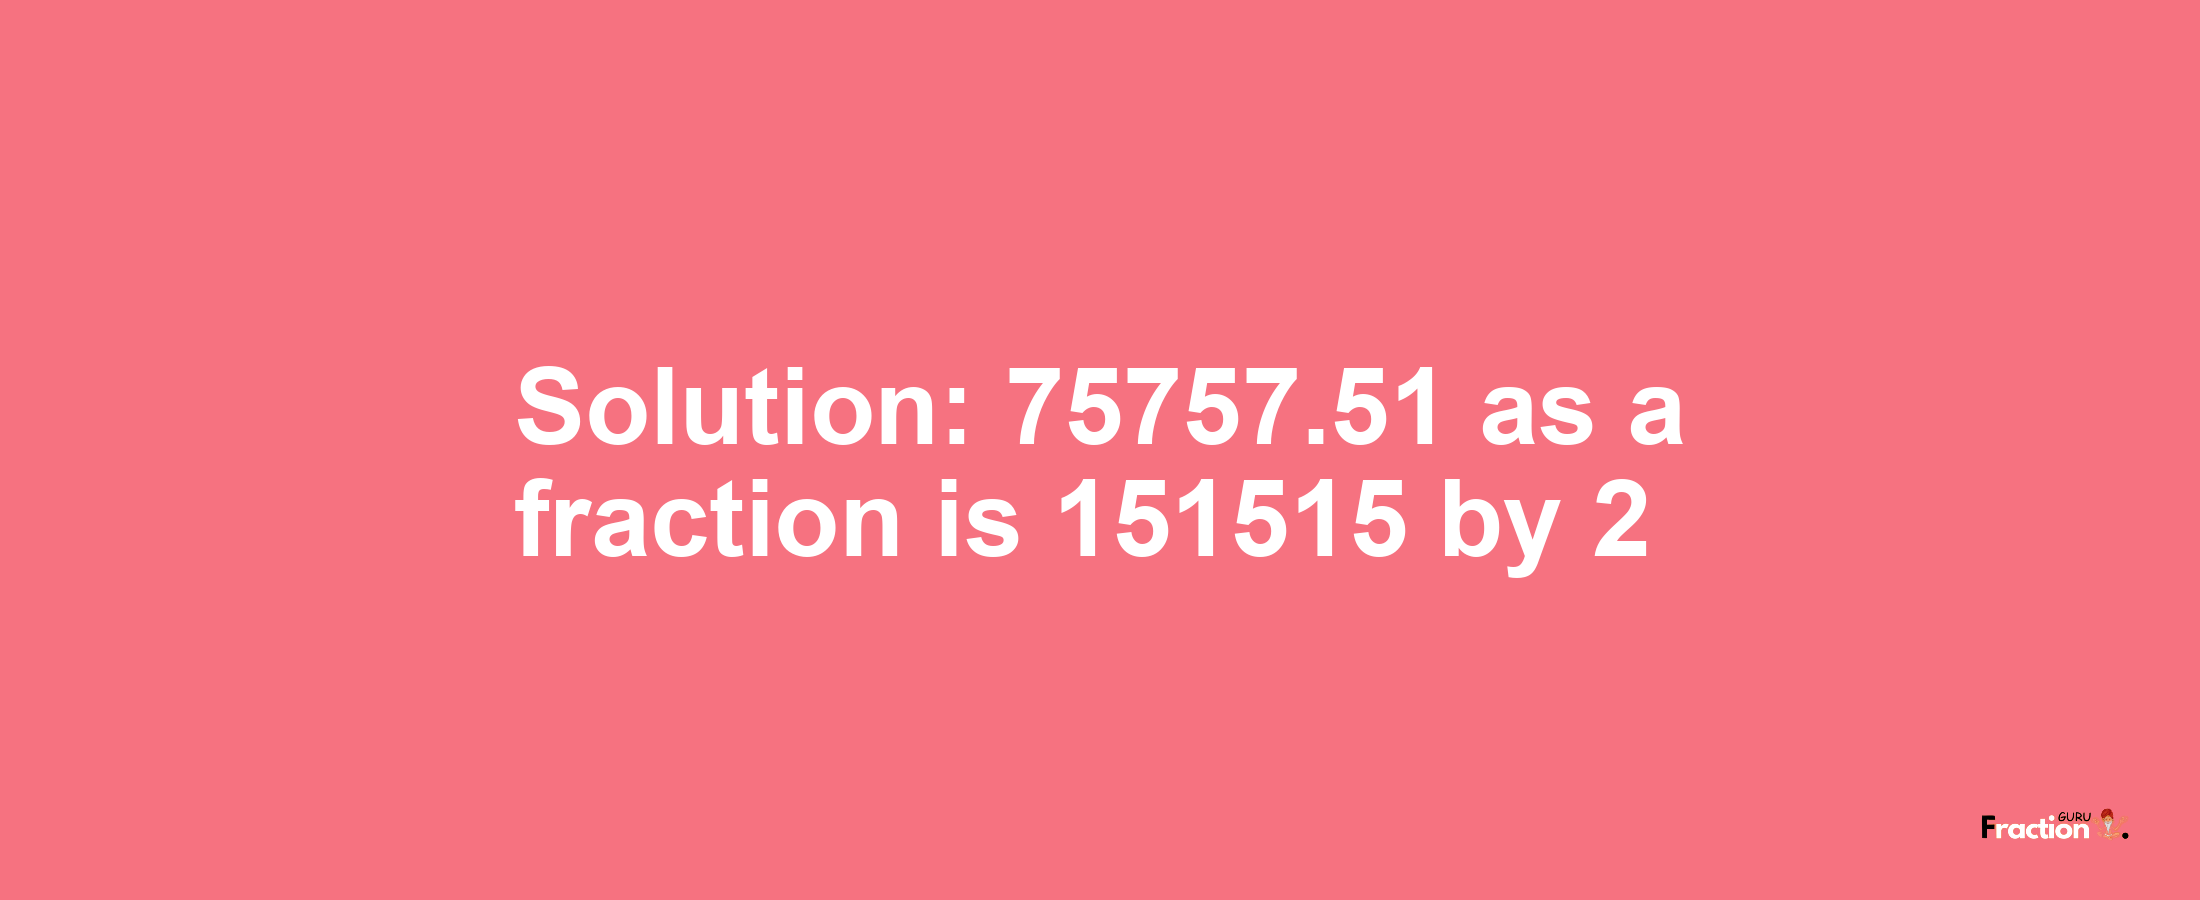 Solution:75757.51 as a fraction is 151515/2